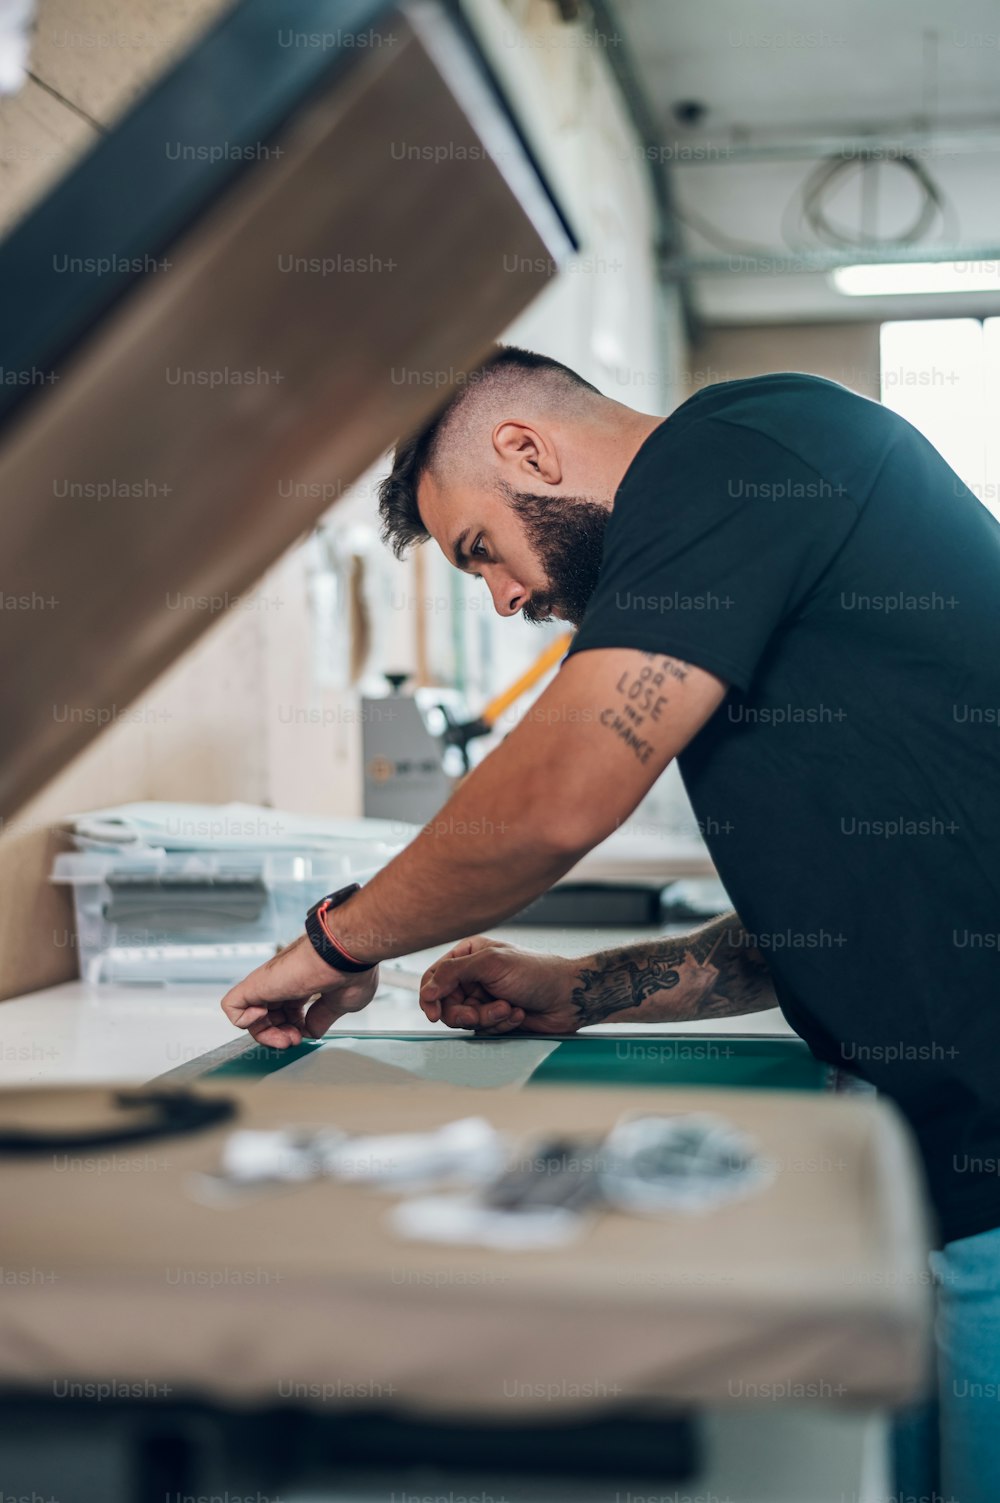 Printing Press Pictures [HD]  Download Free Images on Unsplash